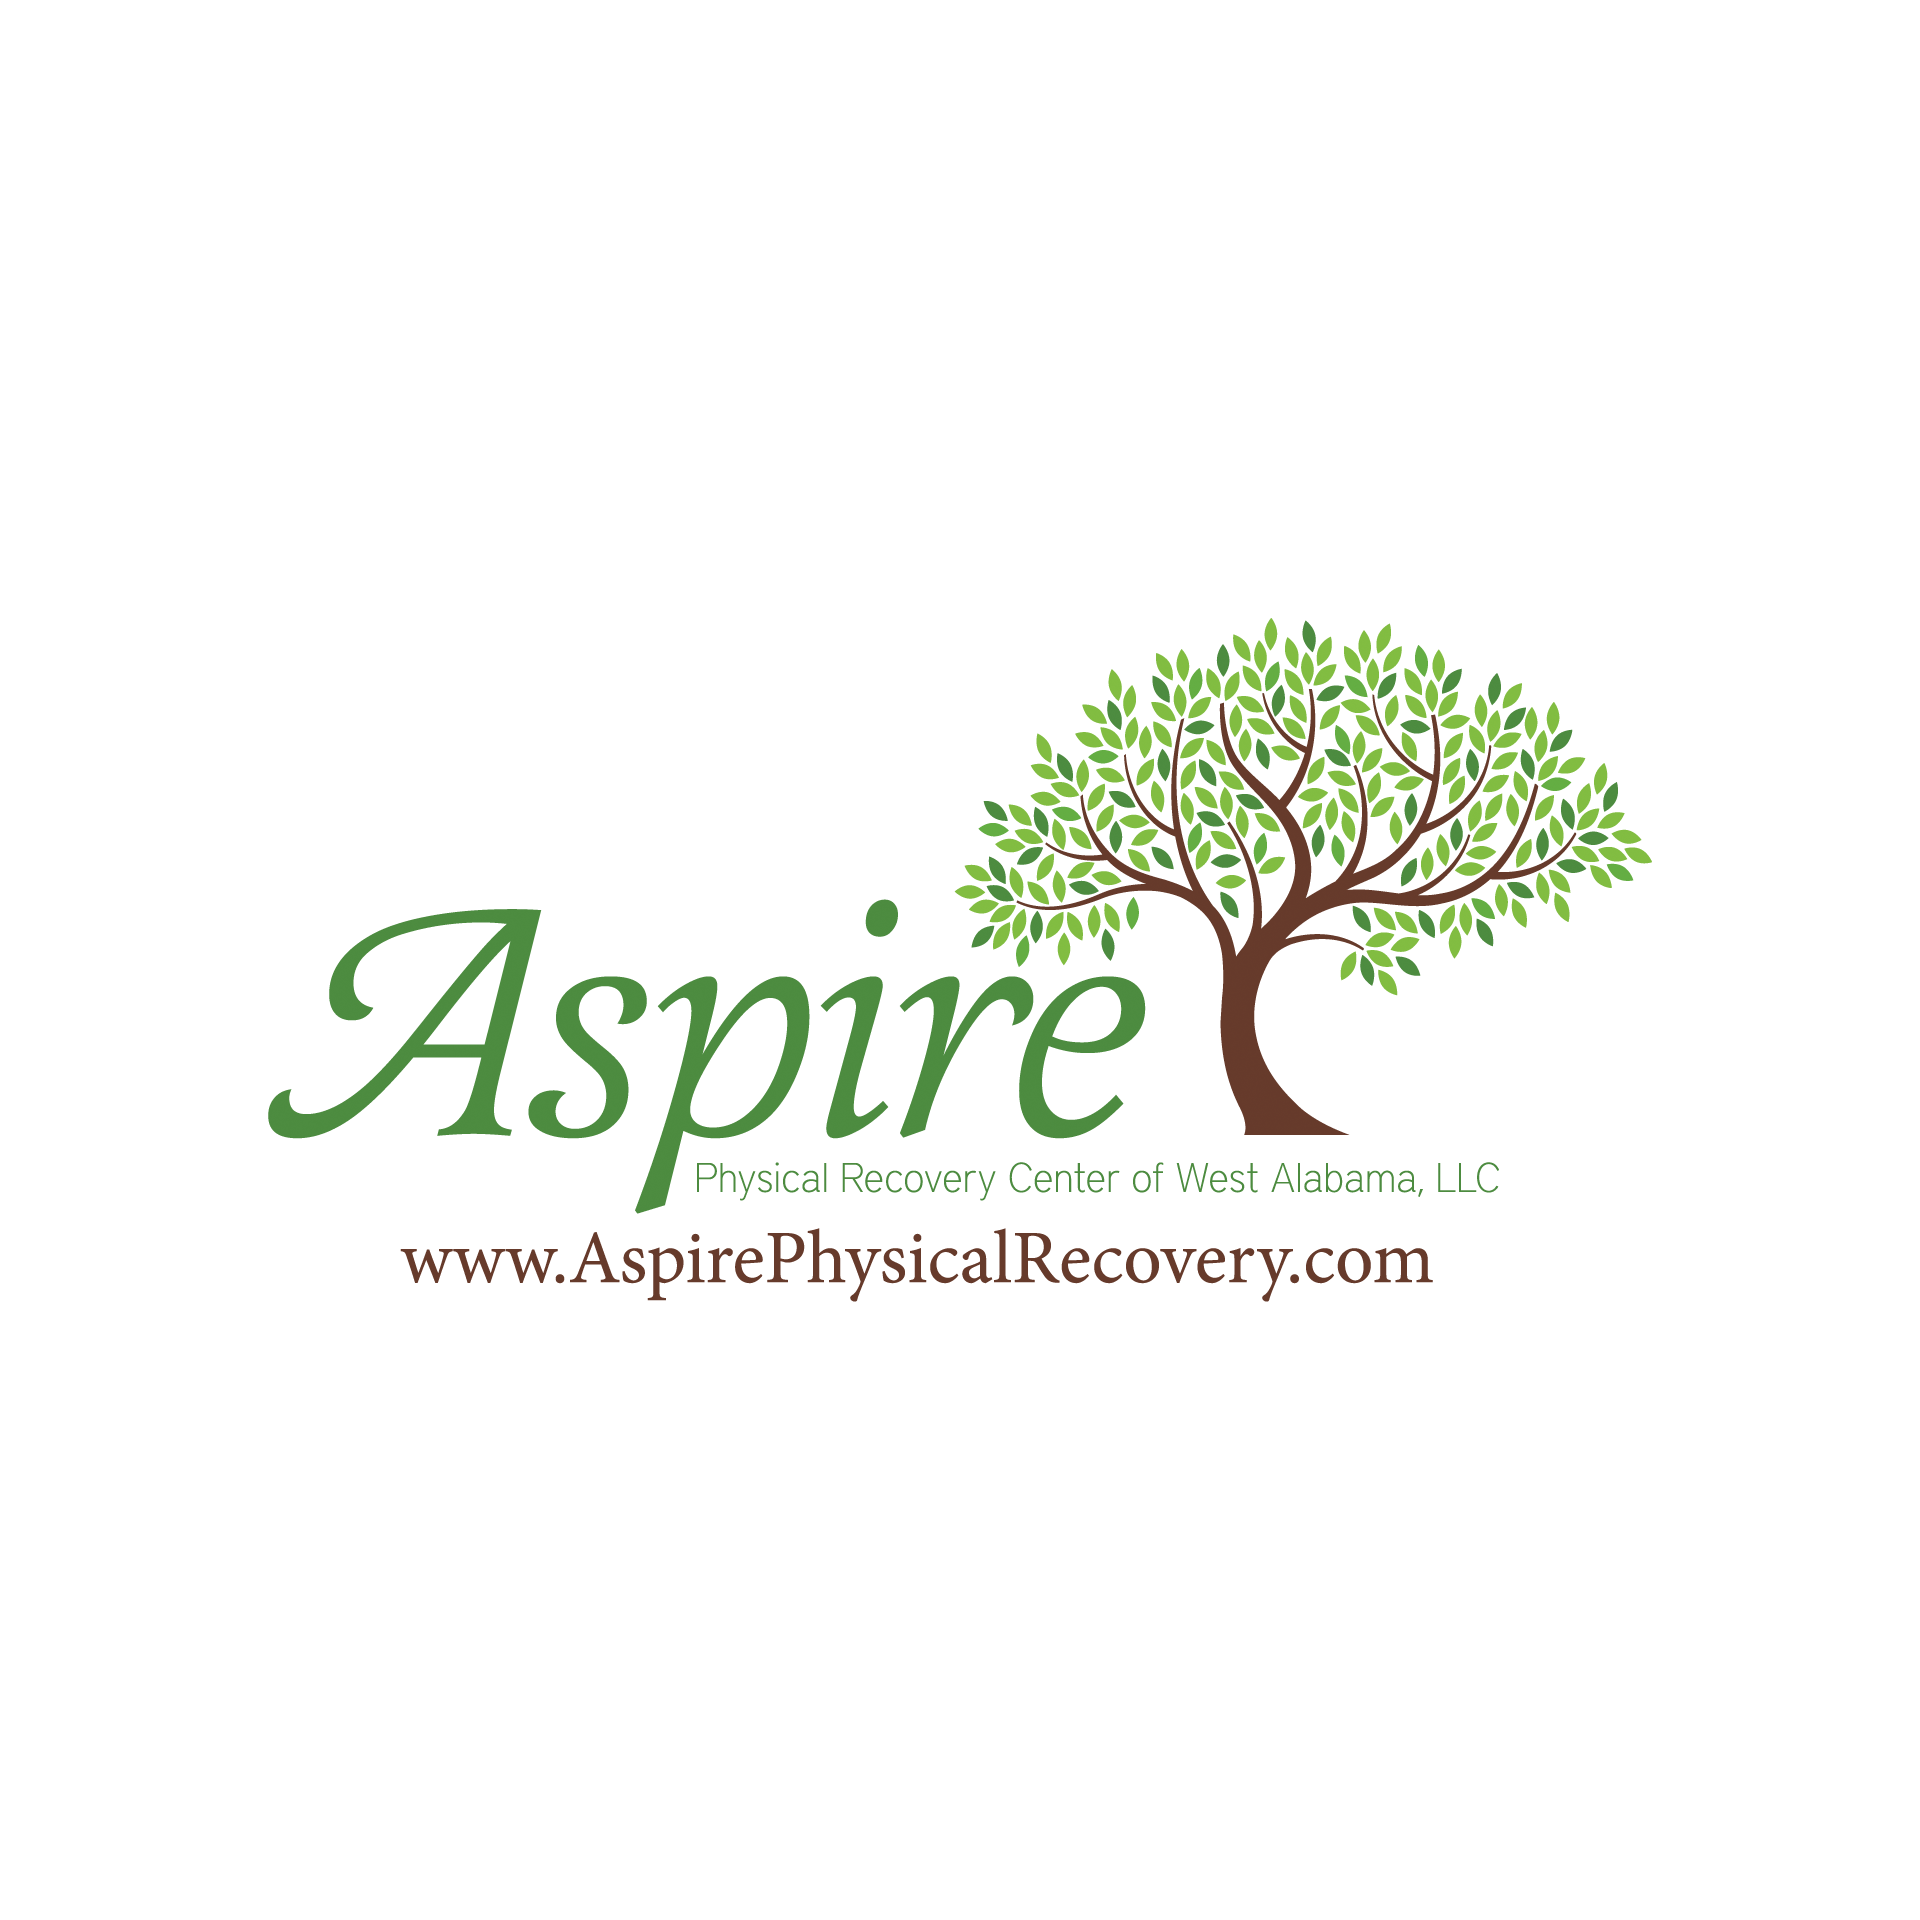 Aspire Physical Recovery Center of West Alabama, LLC